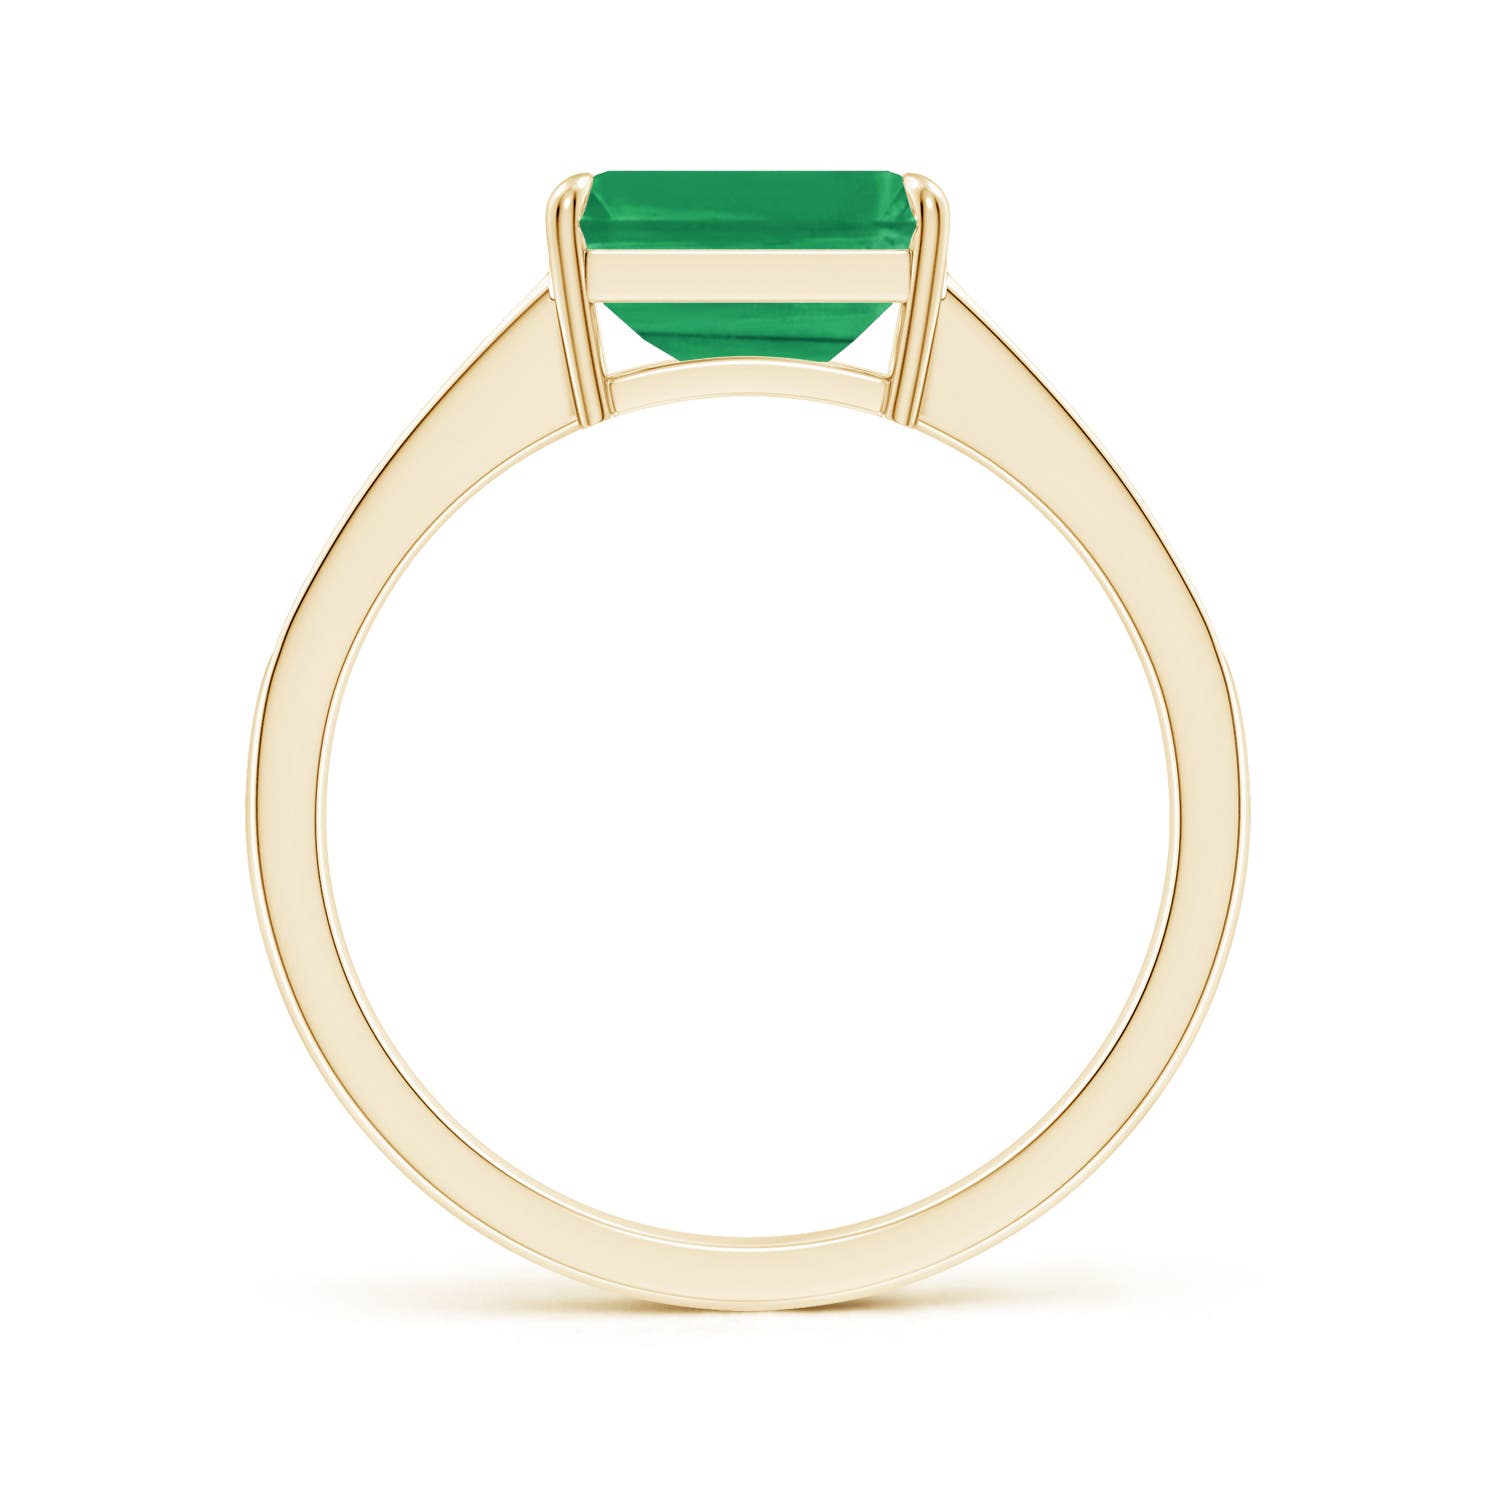 A - Emerald / 1.82 CT / 14 KT Yellow Gold